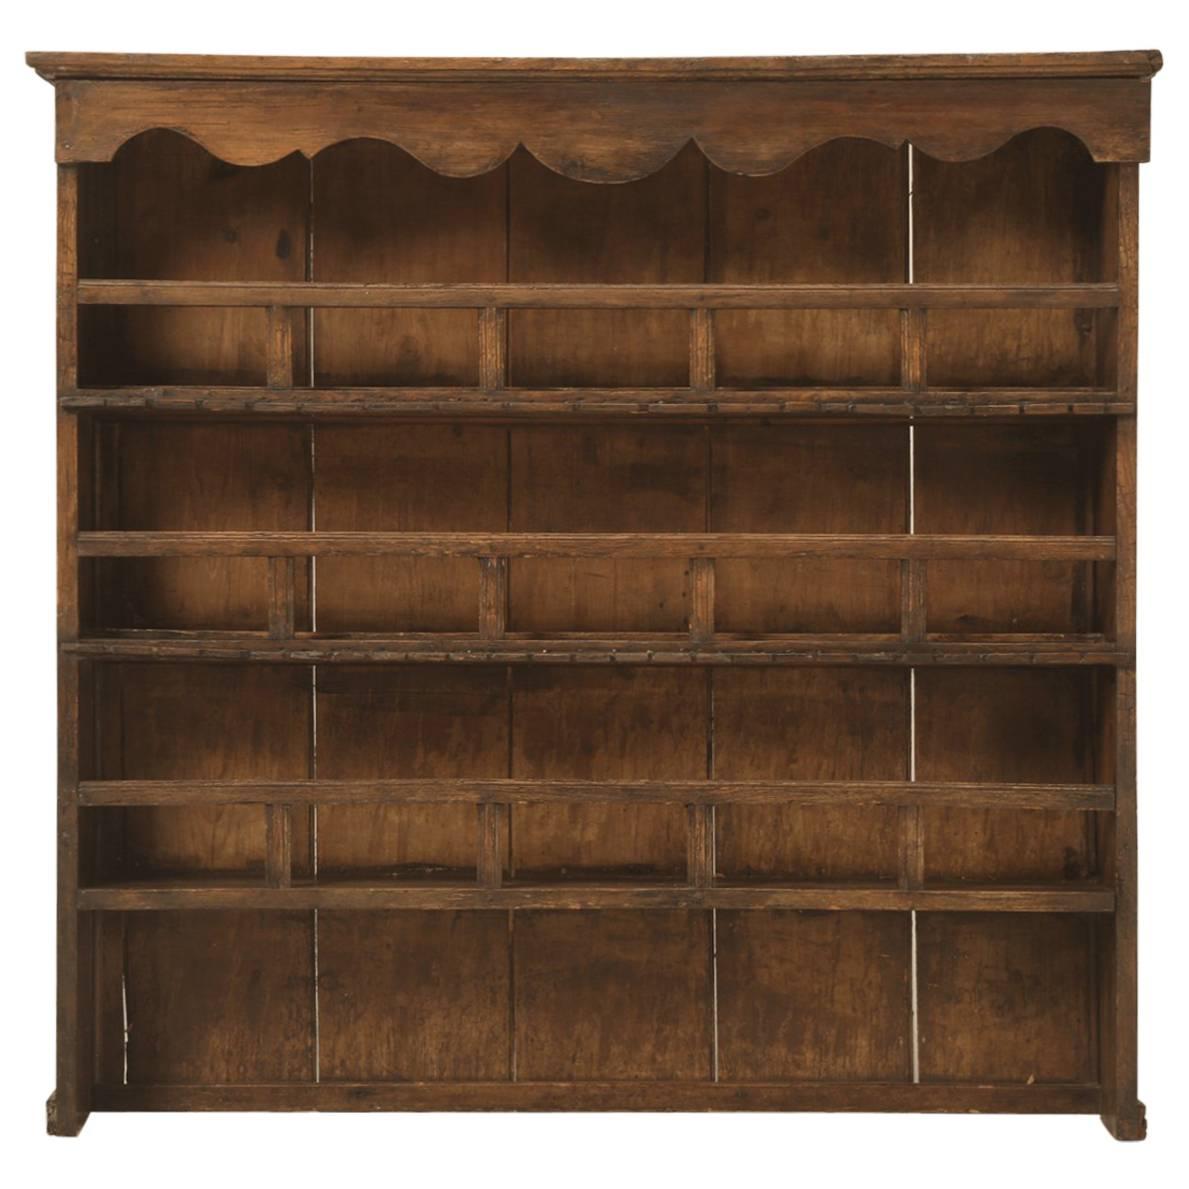 Antique French Hanging Plate Rack, circa 1700s